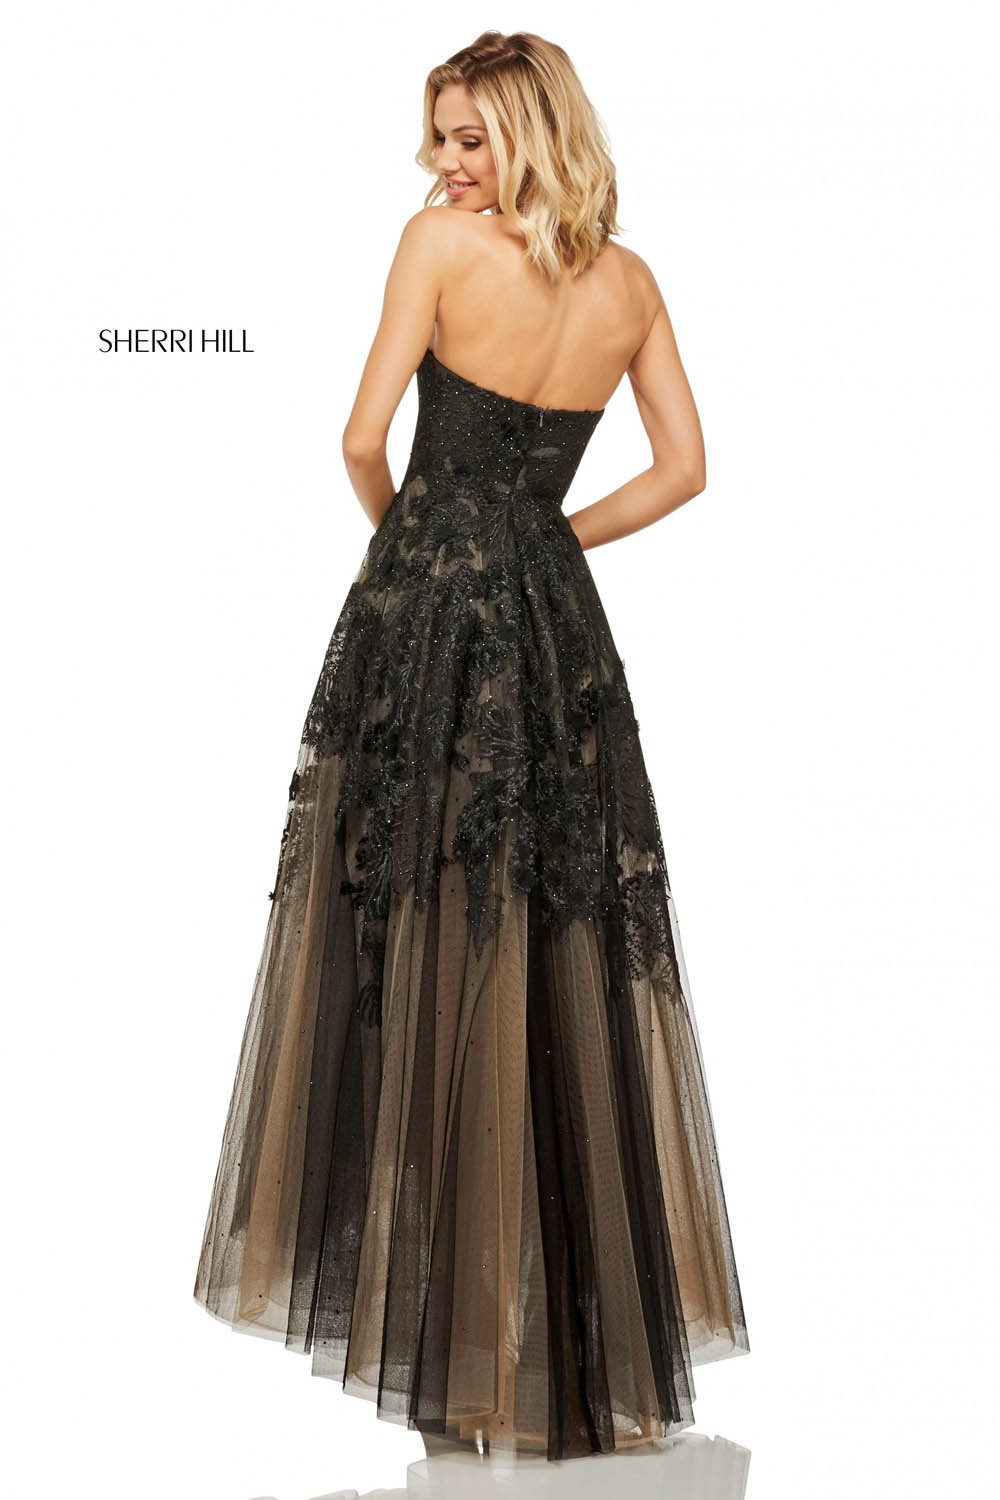 Sherri Hill 52740 dress images in these colors: Black.